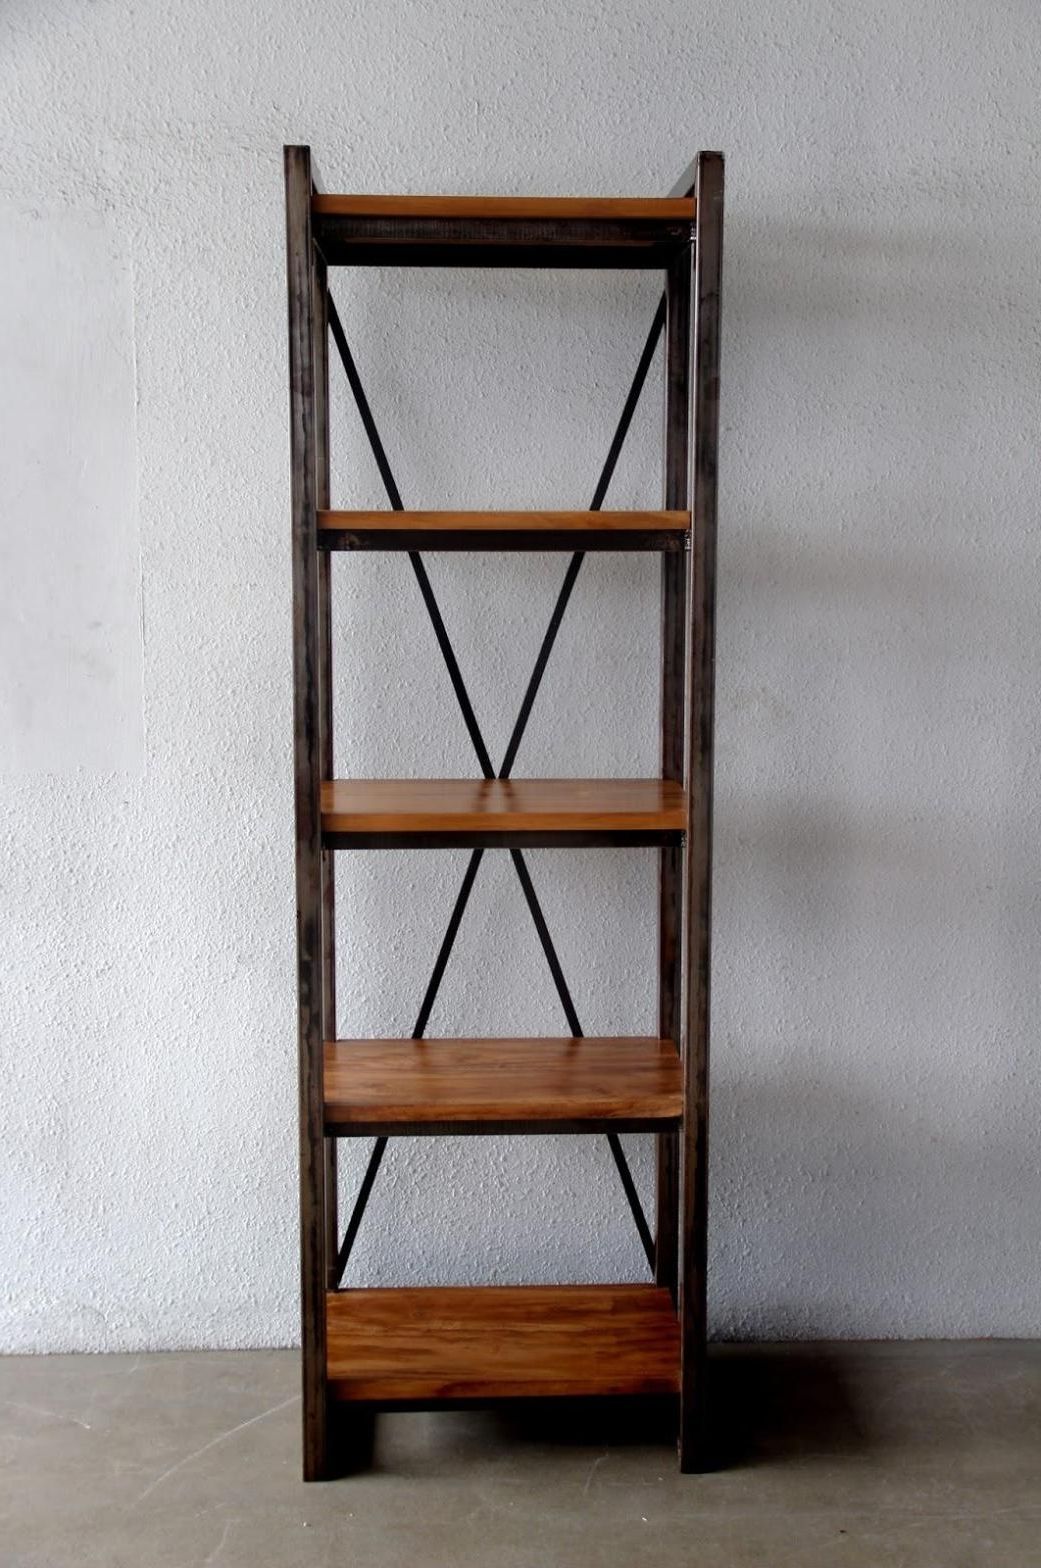 Narrow Tall Bookcases Regarding Recent Tall Narrow Bookcase Ikea : Doherty House – Tall Narrow Bookcase (View 7 of 15)